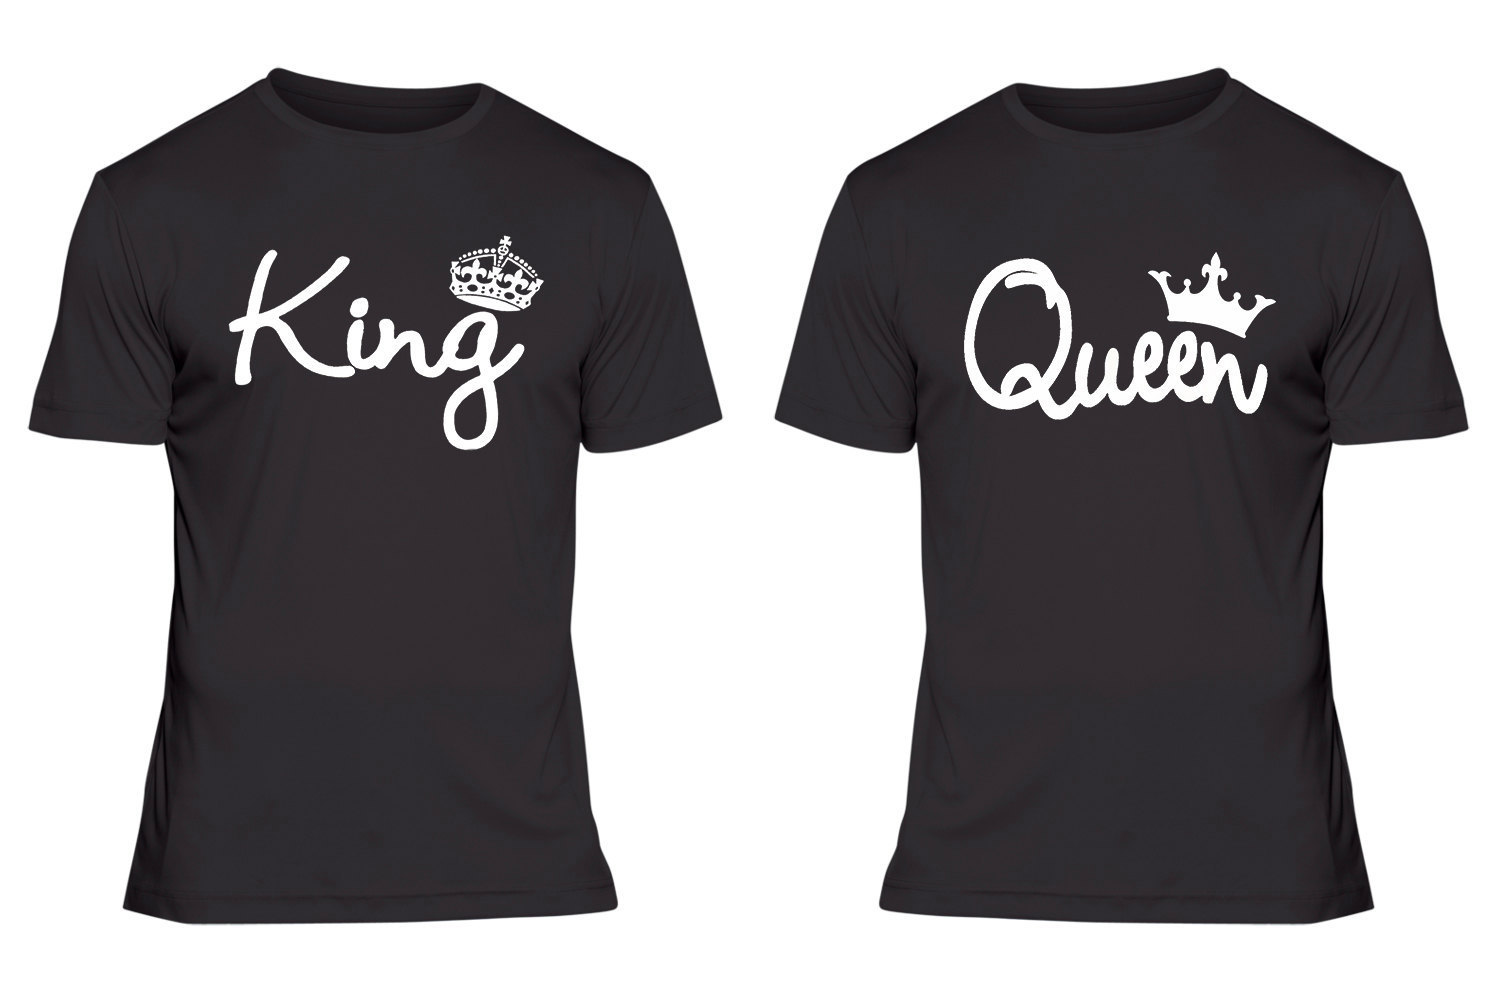 Couple's King and Queen T-shirt Set by FreshteesNY on Etsy